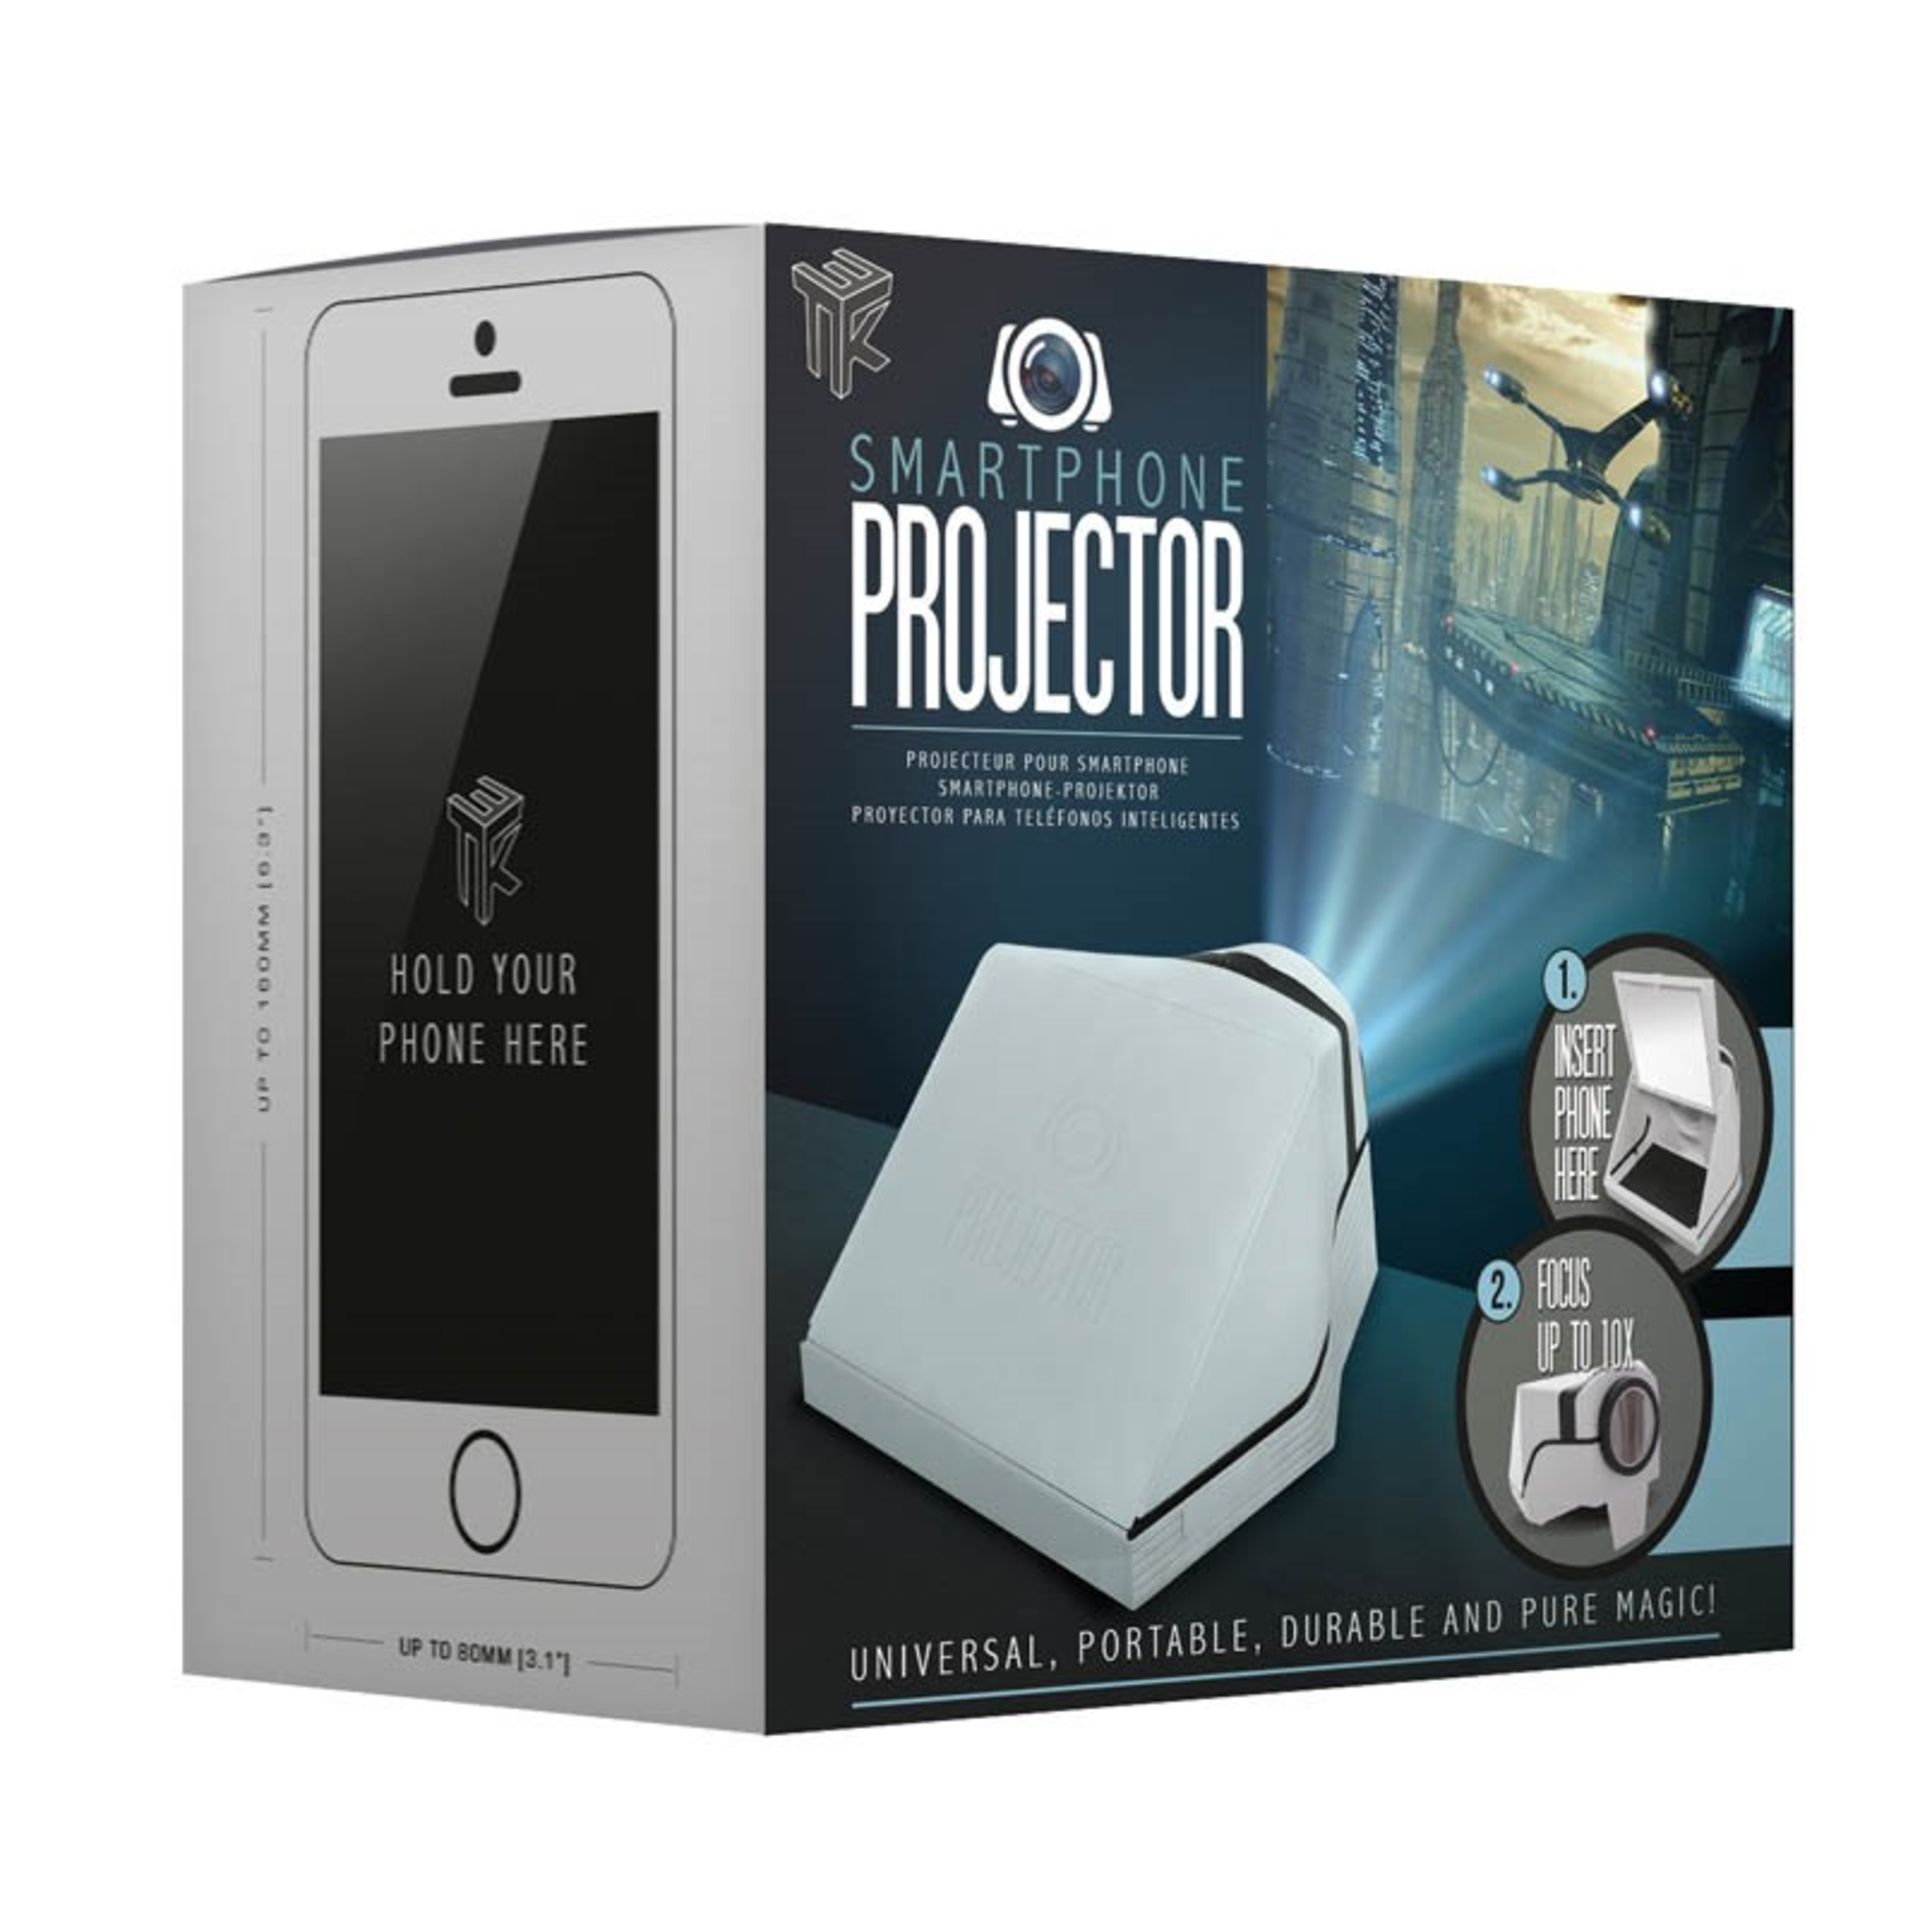 V Brand New Smartphone Projector - Projects 40" Screen - Focus Up To 10x - ISP £19.99 (Paladone) - Image 2 of 2